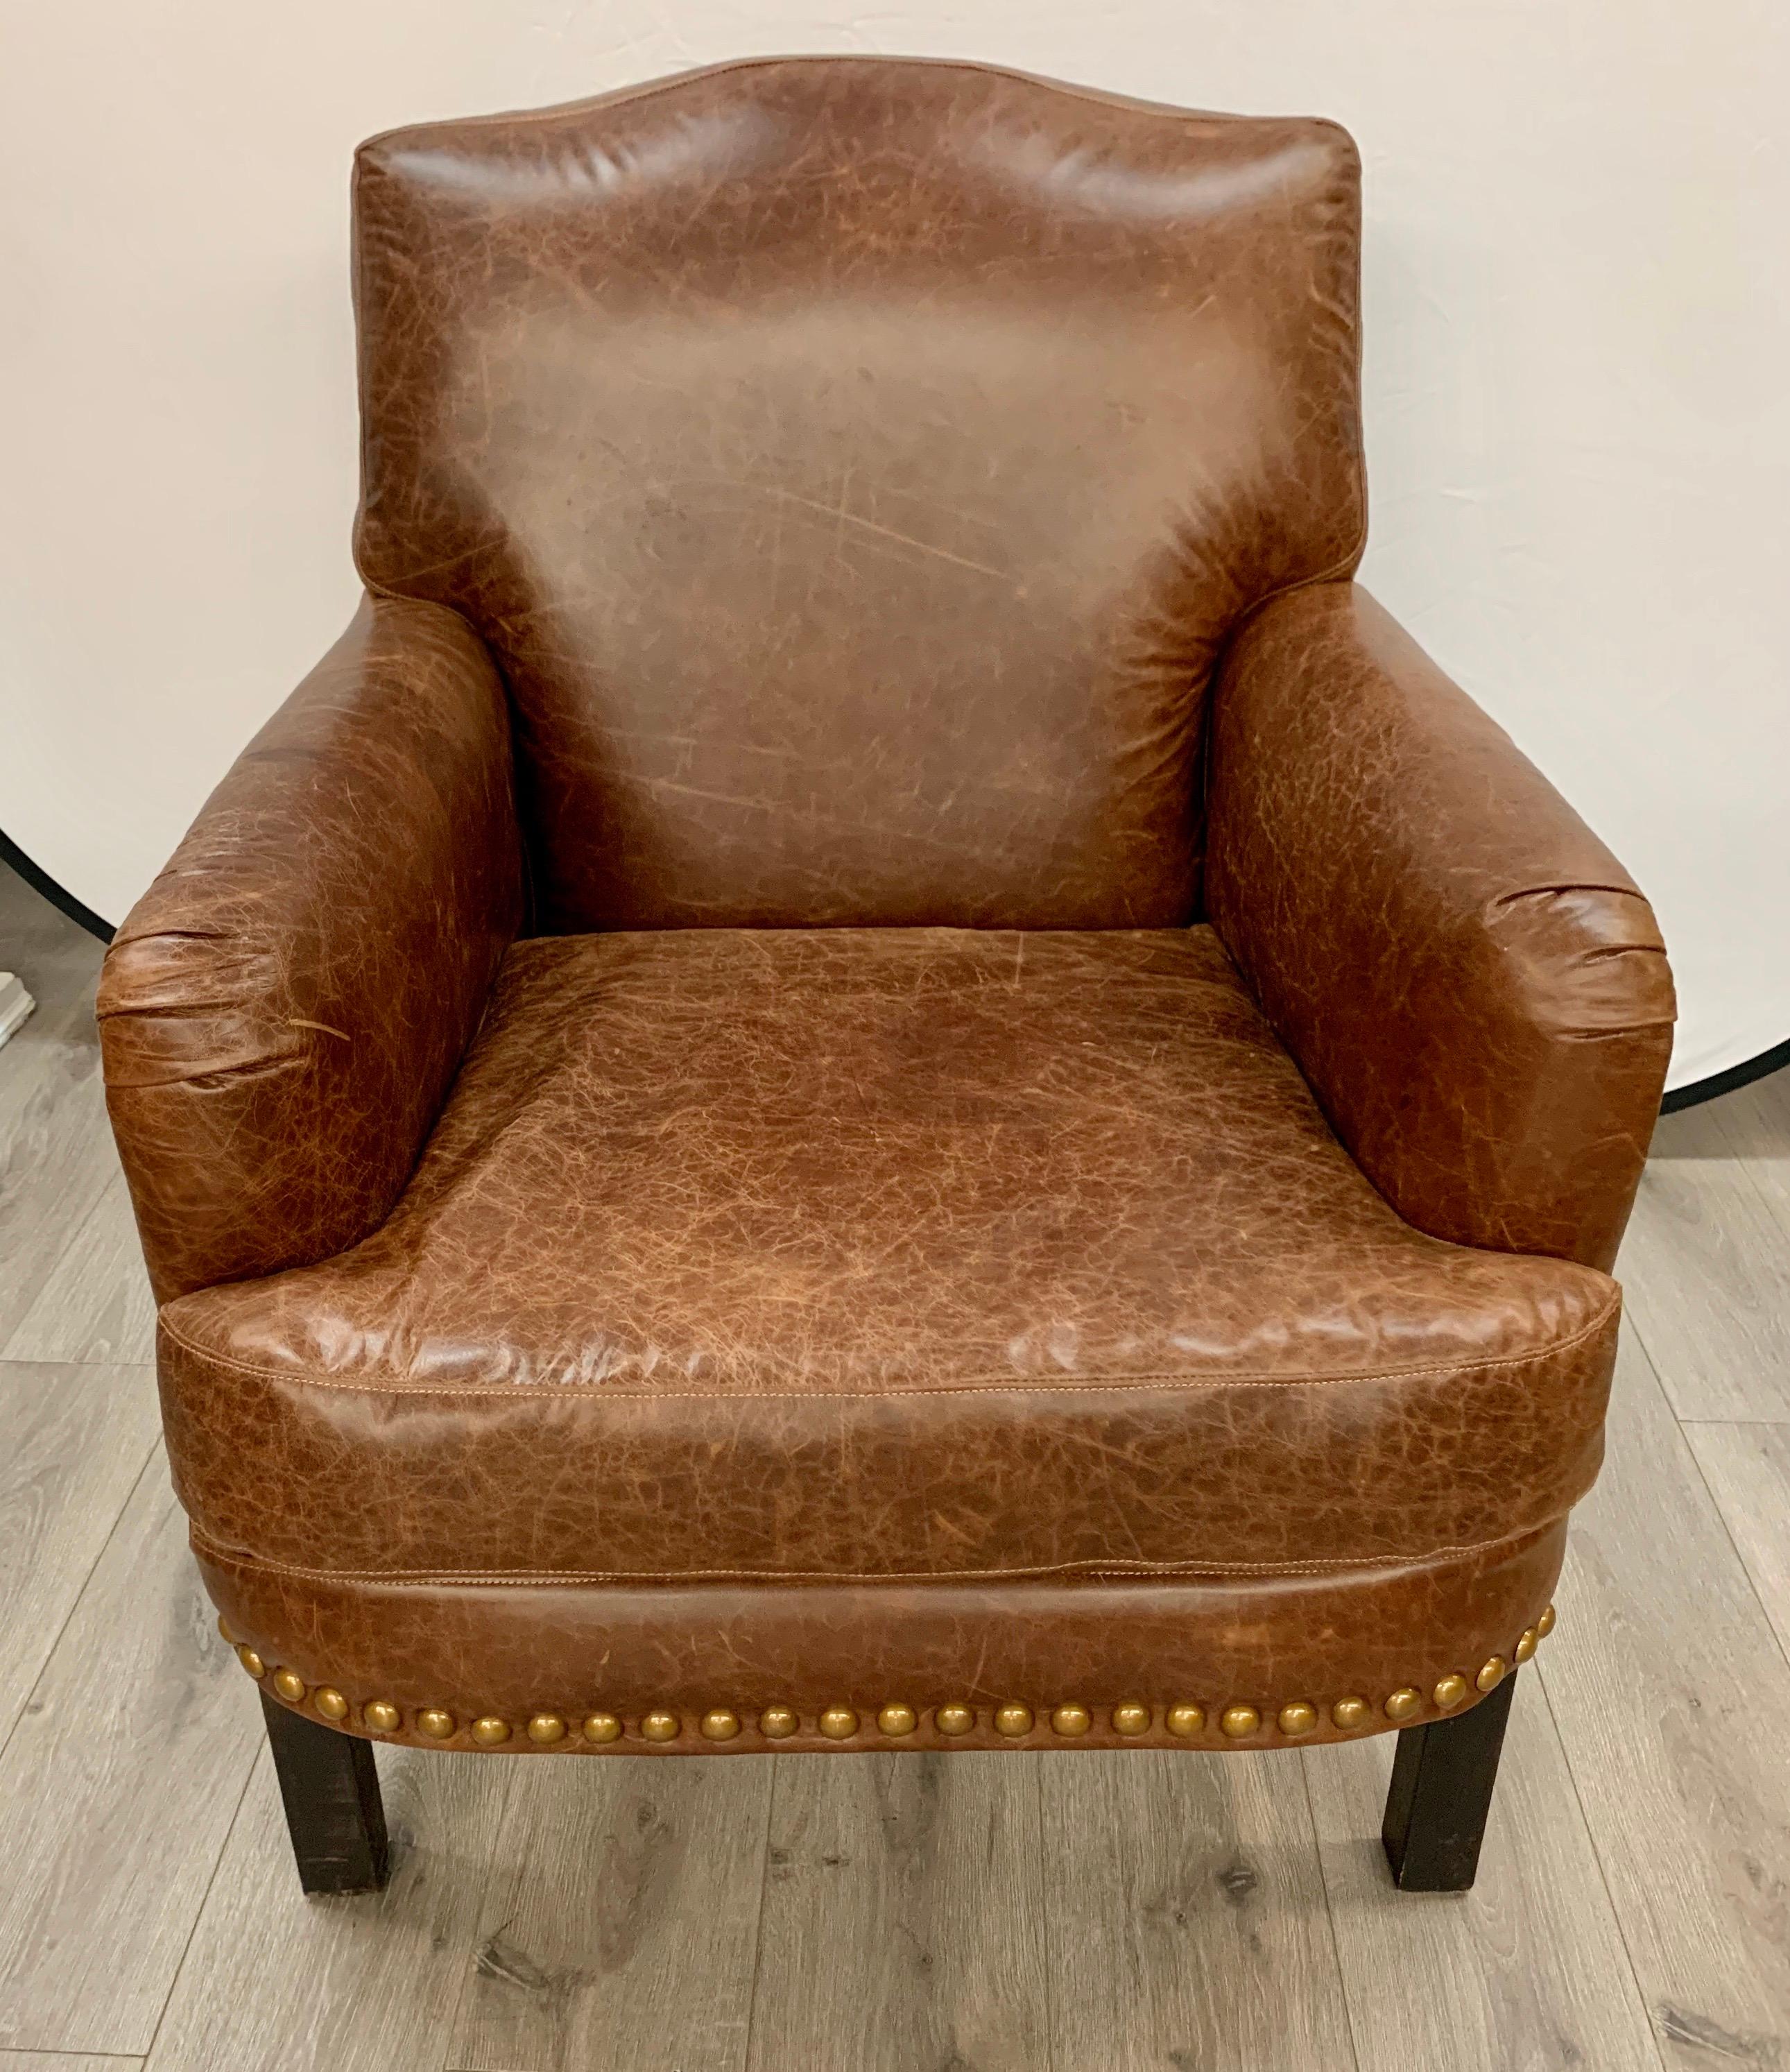 20th Century Pair of Matching Brown Leather Nailhead Club Chairs